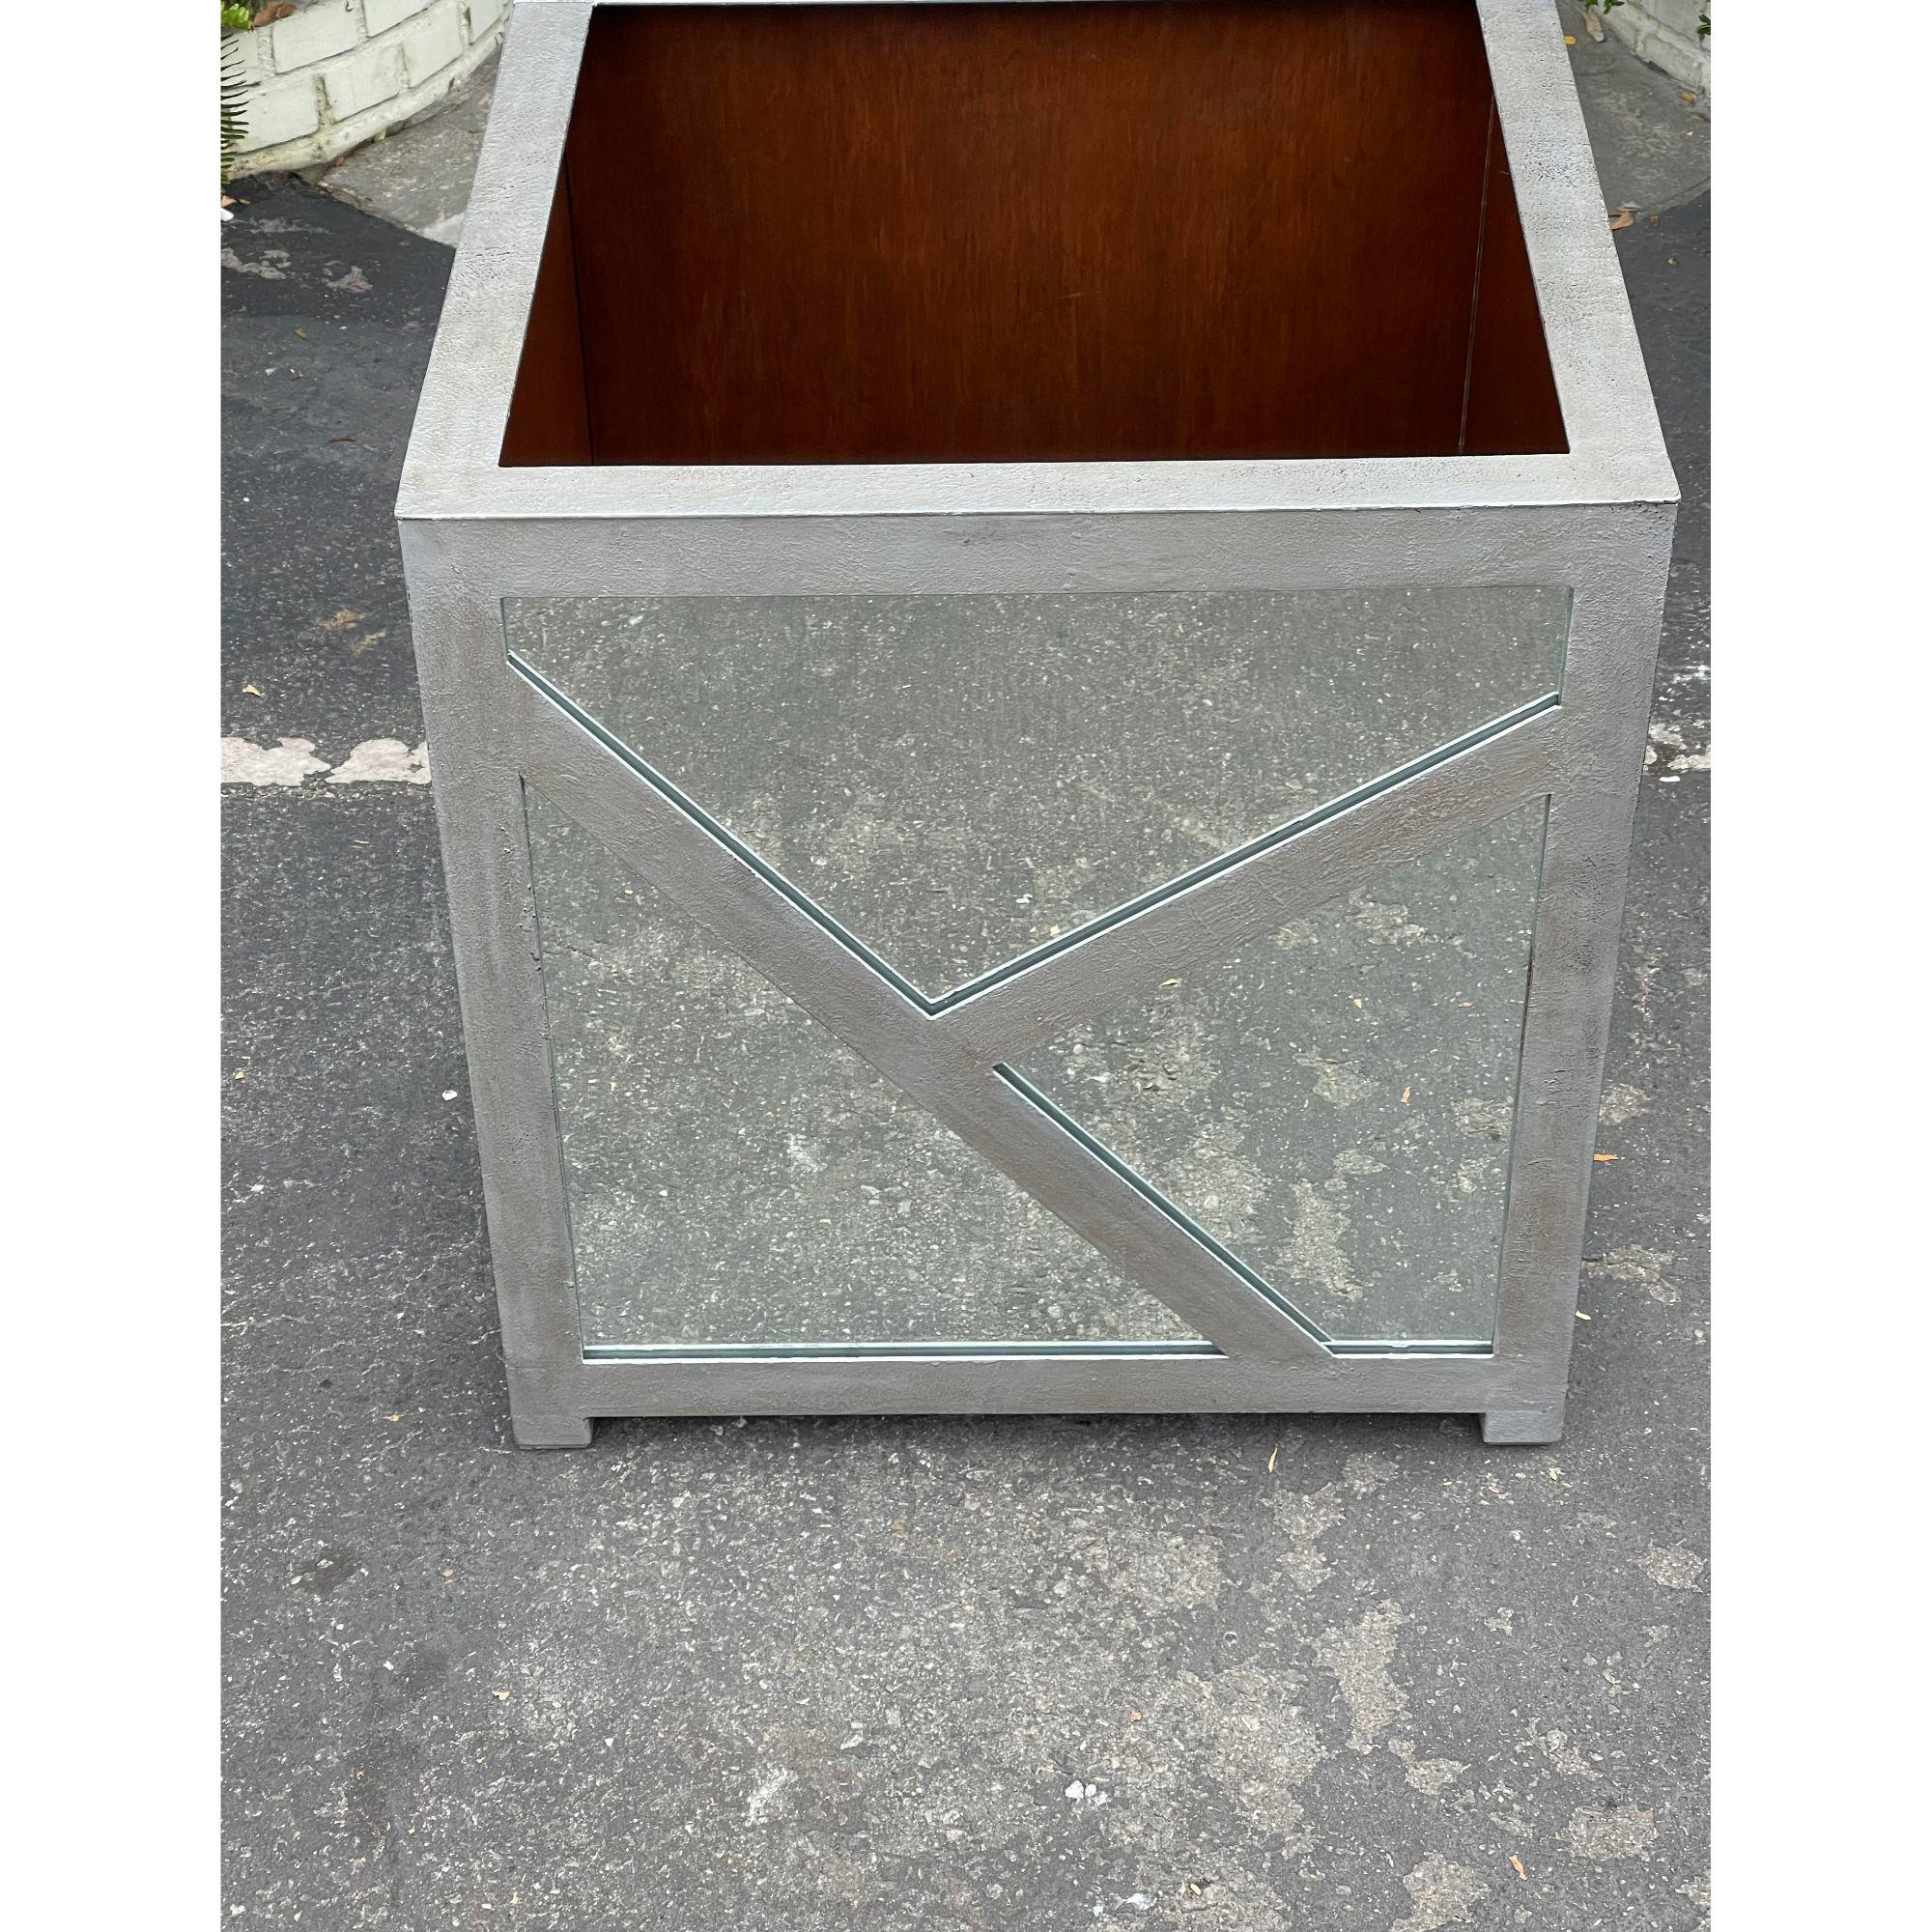 Art Deco Style Mahogany Lined Mirrored Iron Planter, 1990s For Sale 2